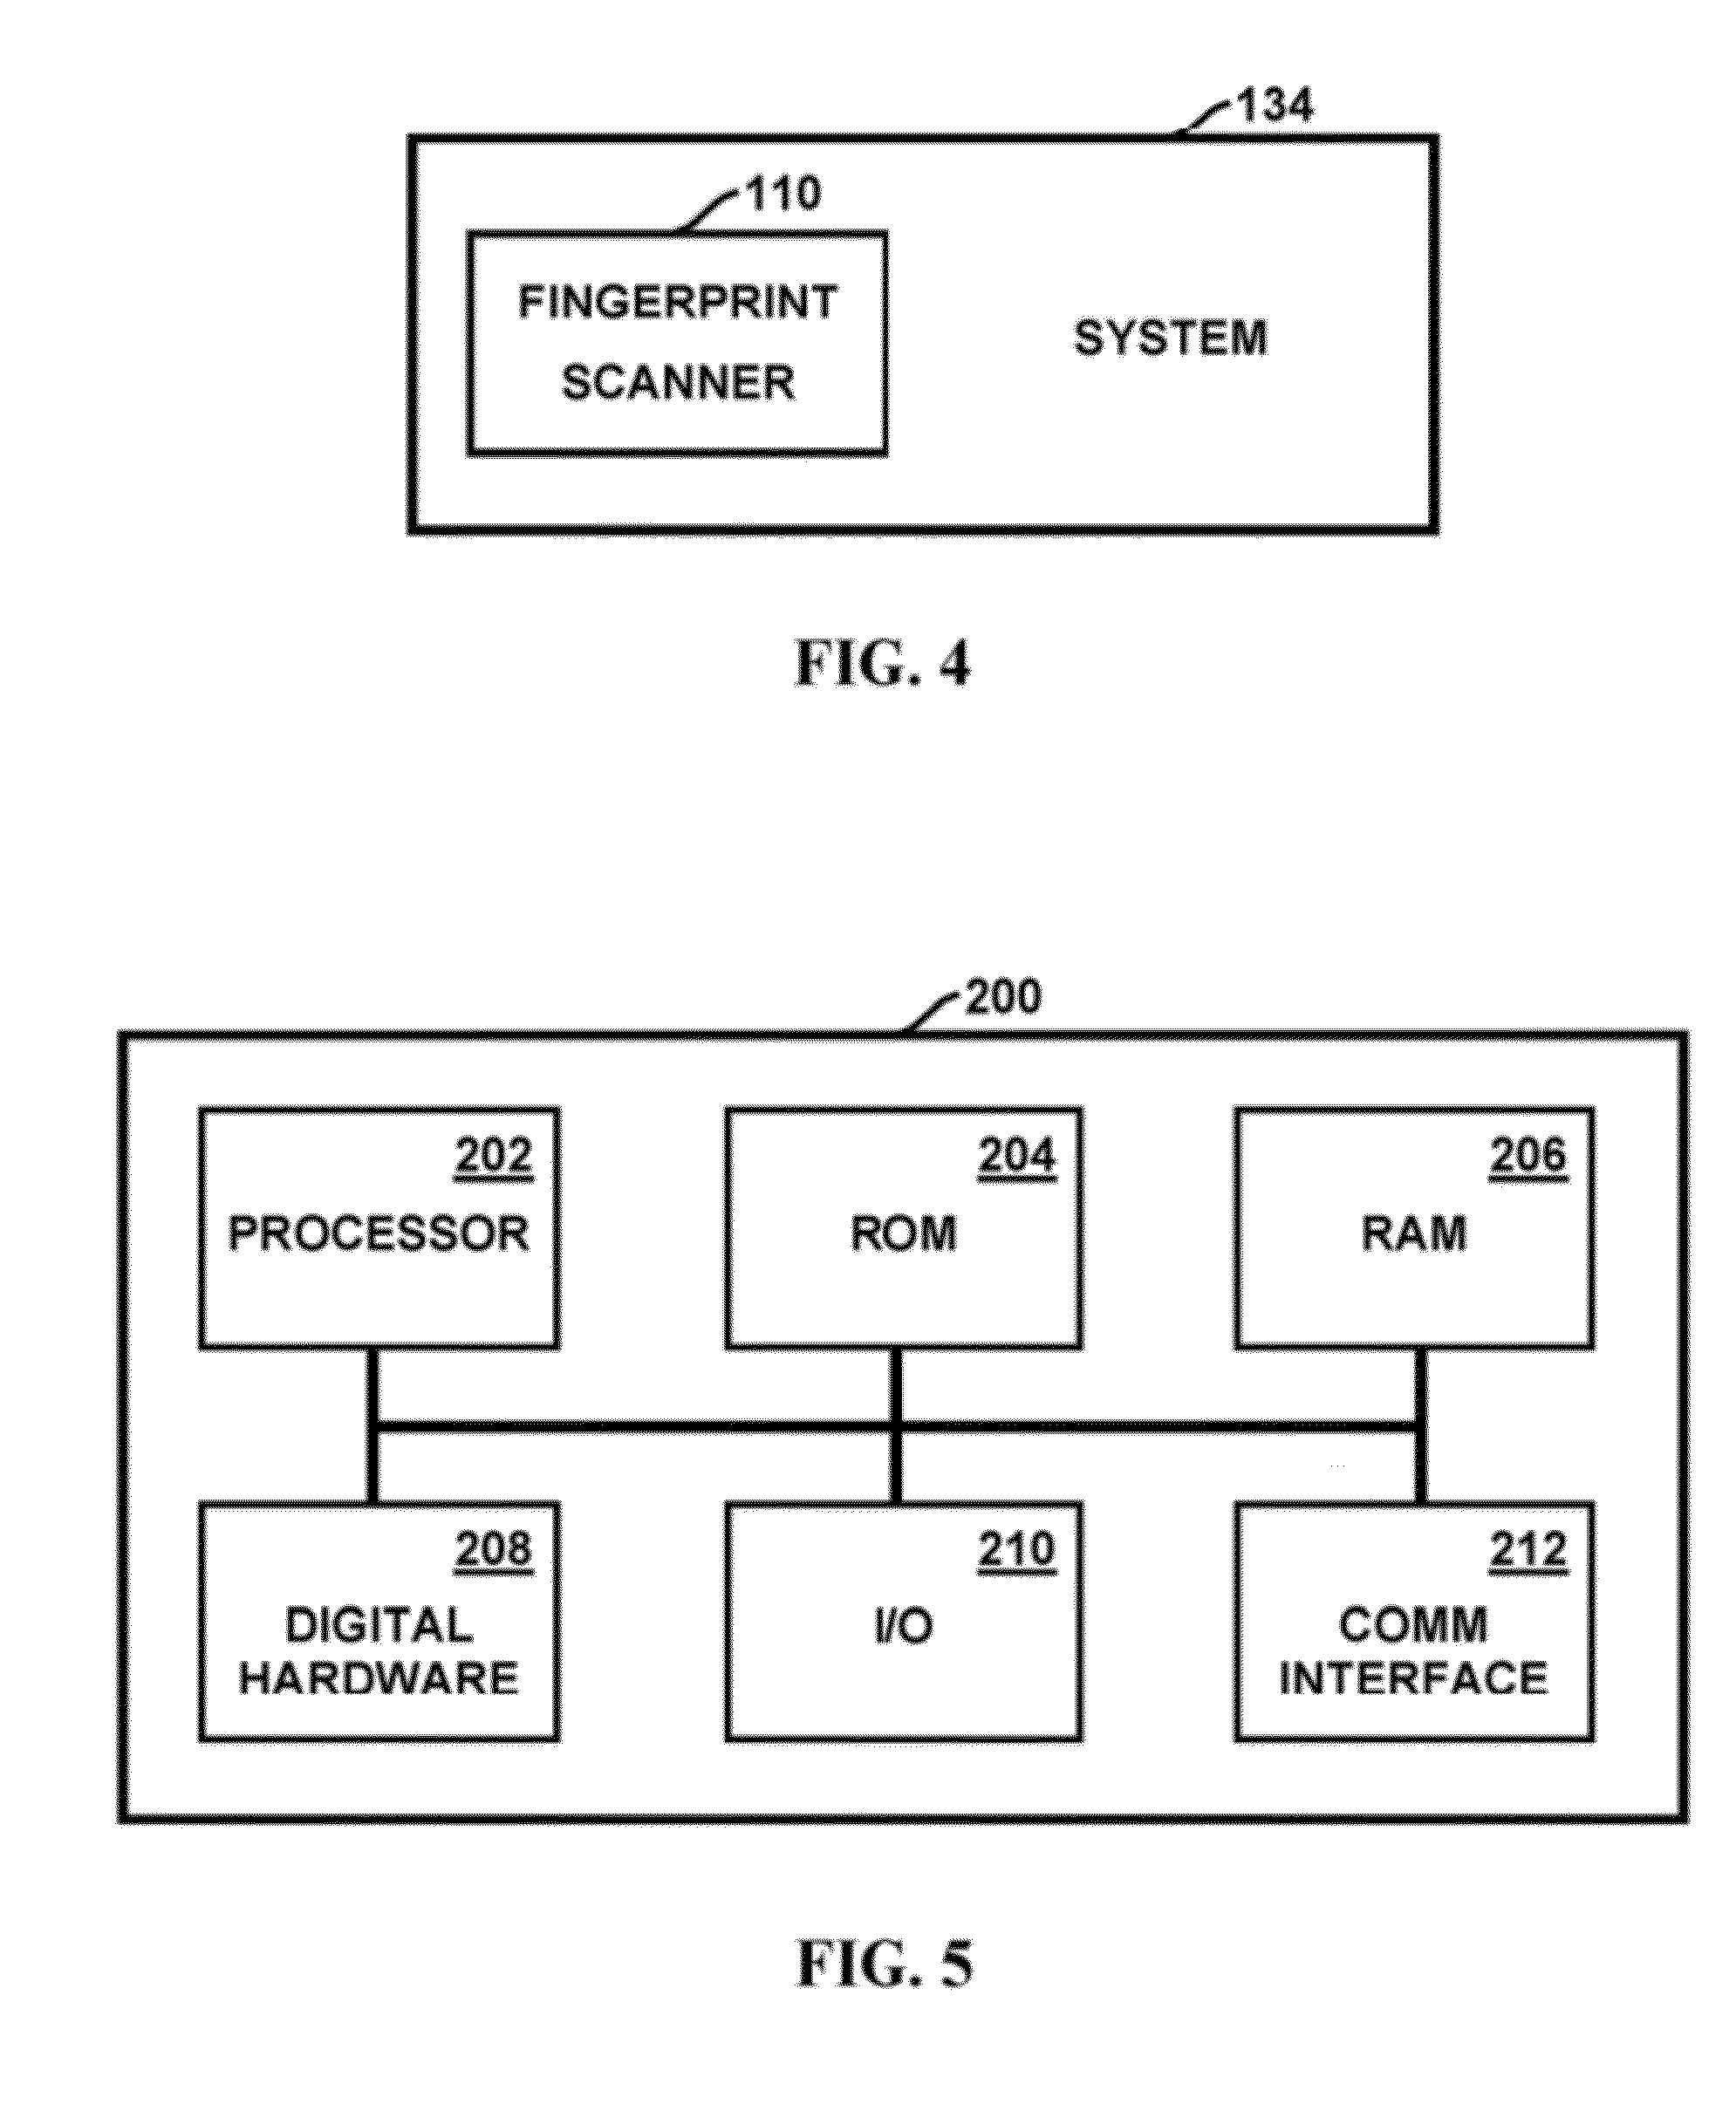 Method and apparatus for authenticating swipe biometric scanners